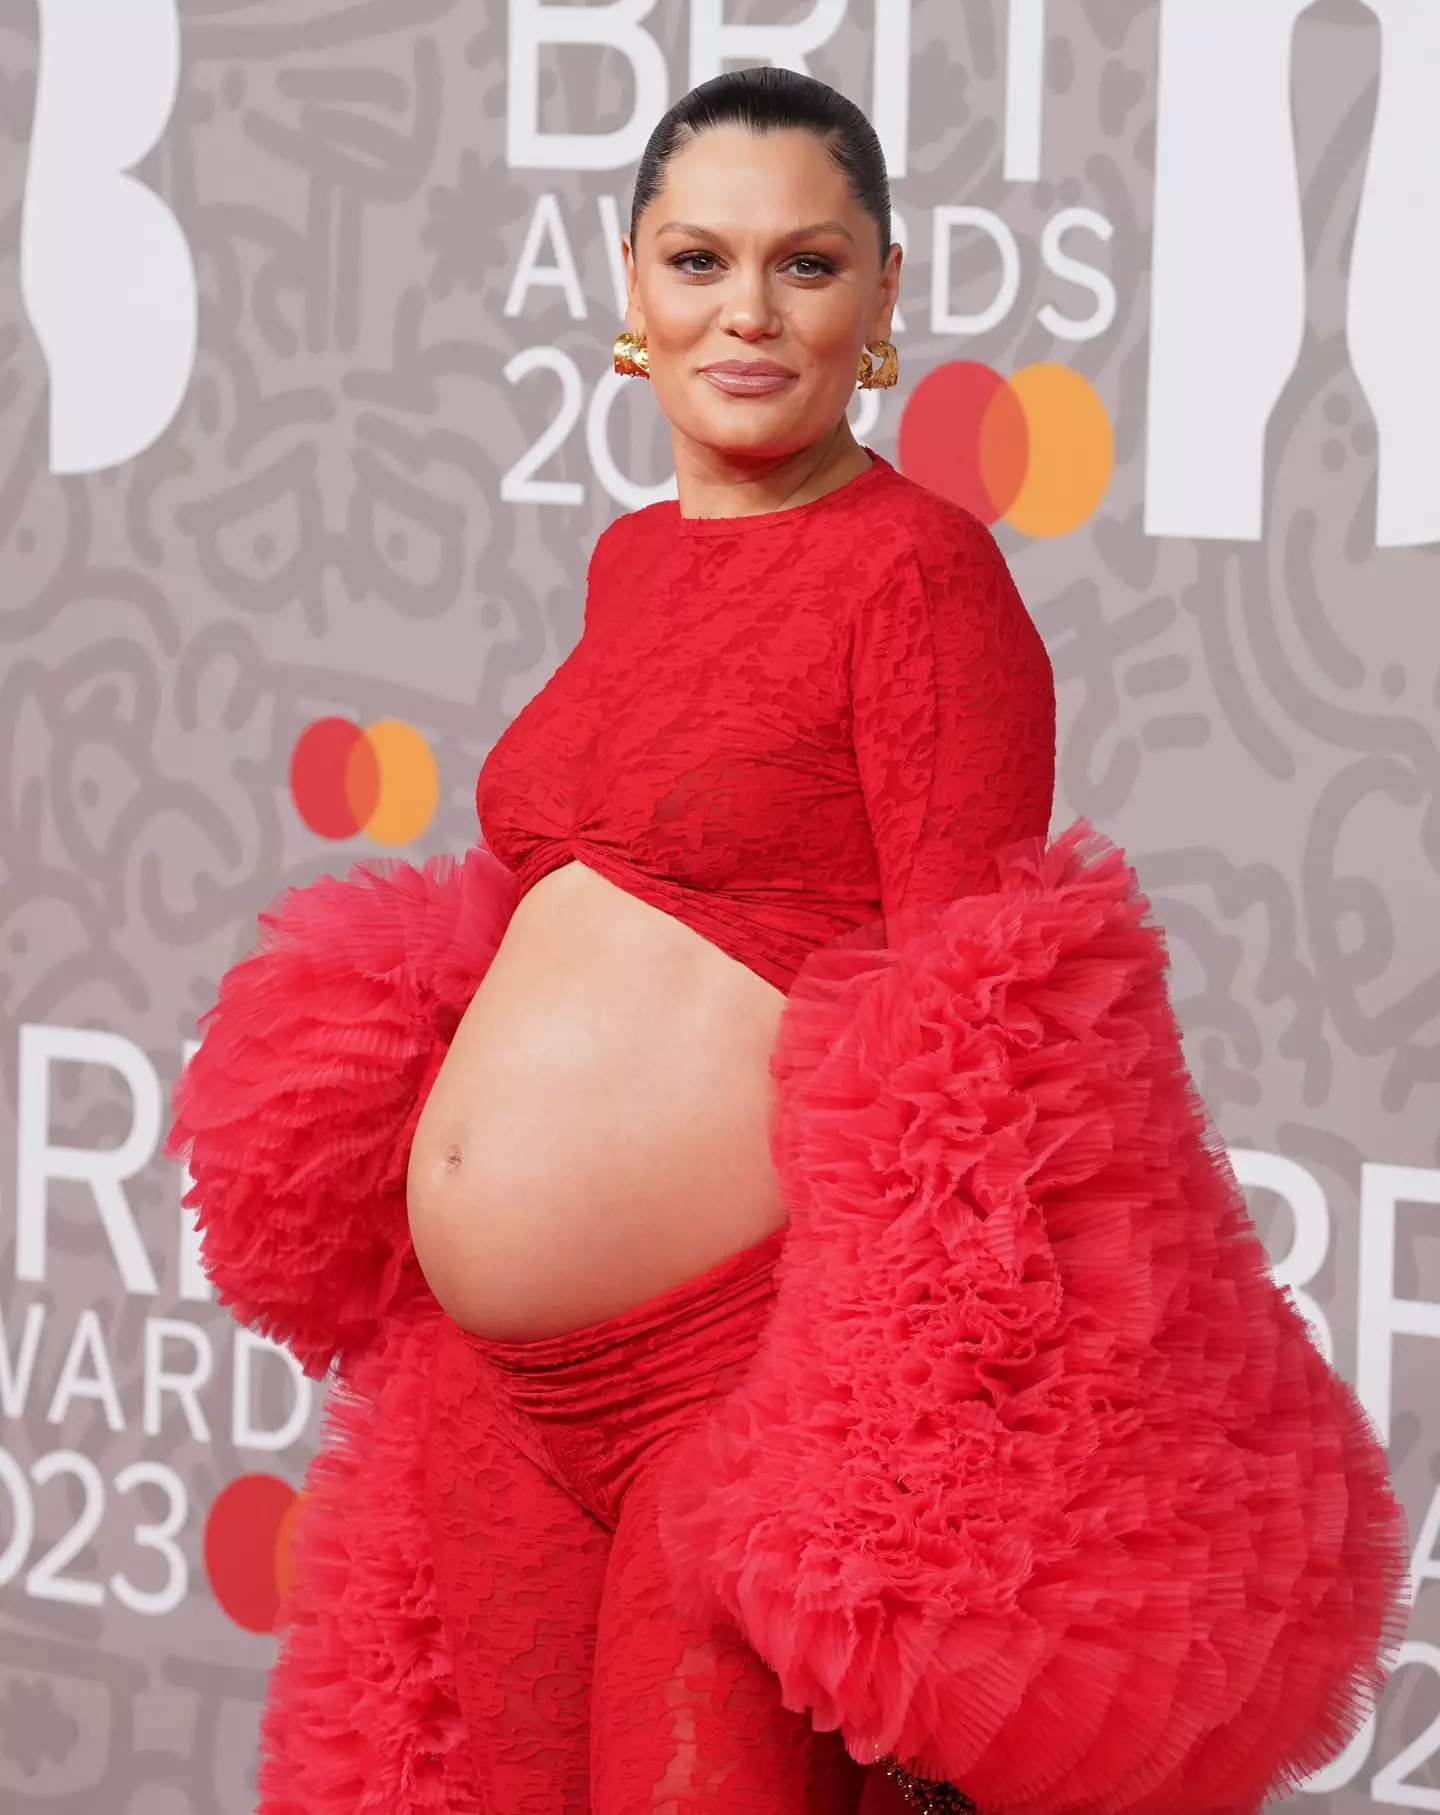 Jessie J flaunted her bump on the red carpet.